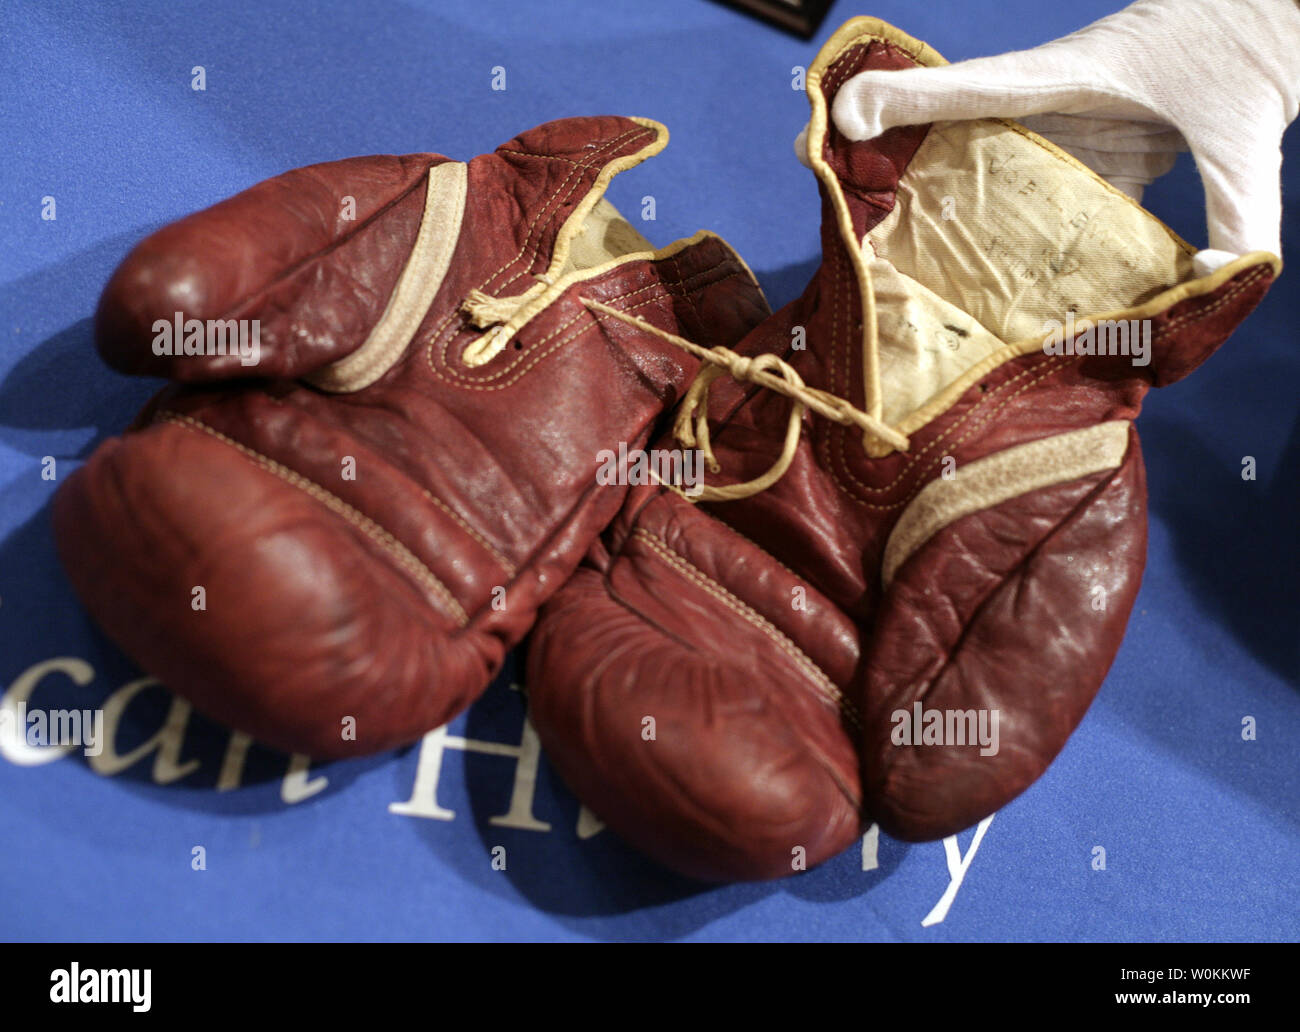 This pair of leather boxing gloves were worn by Joe Louis in the 1936 bout  with the German boxer Max Schmeling in New York City. Although…